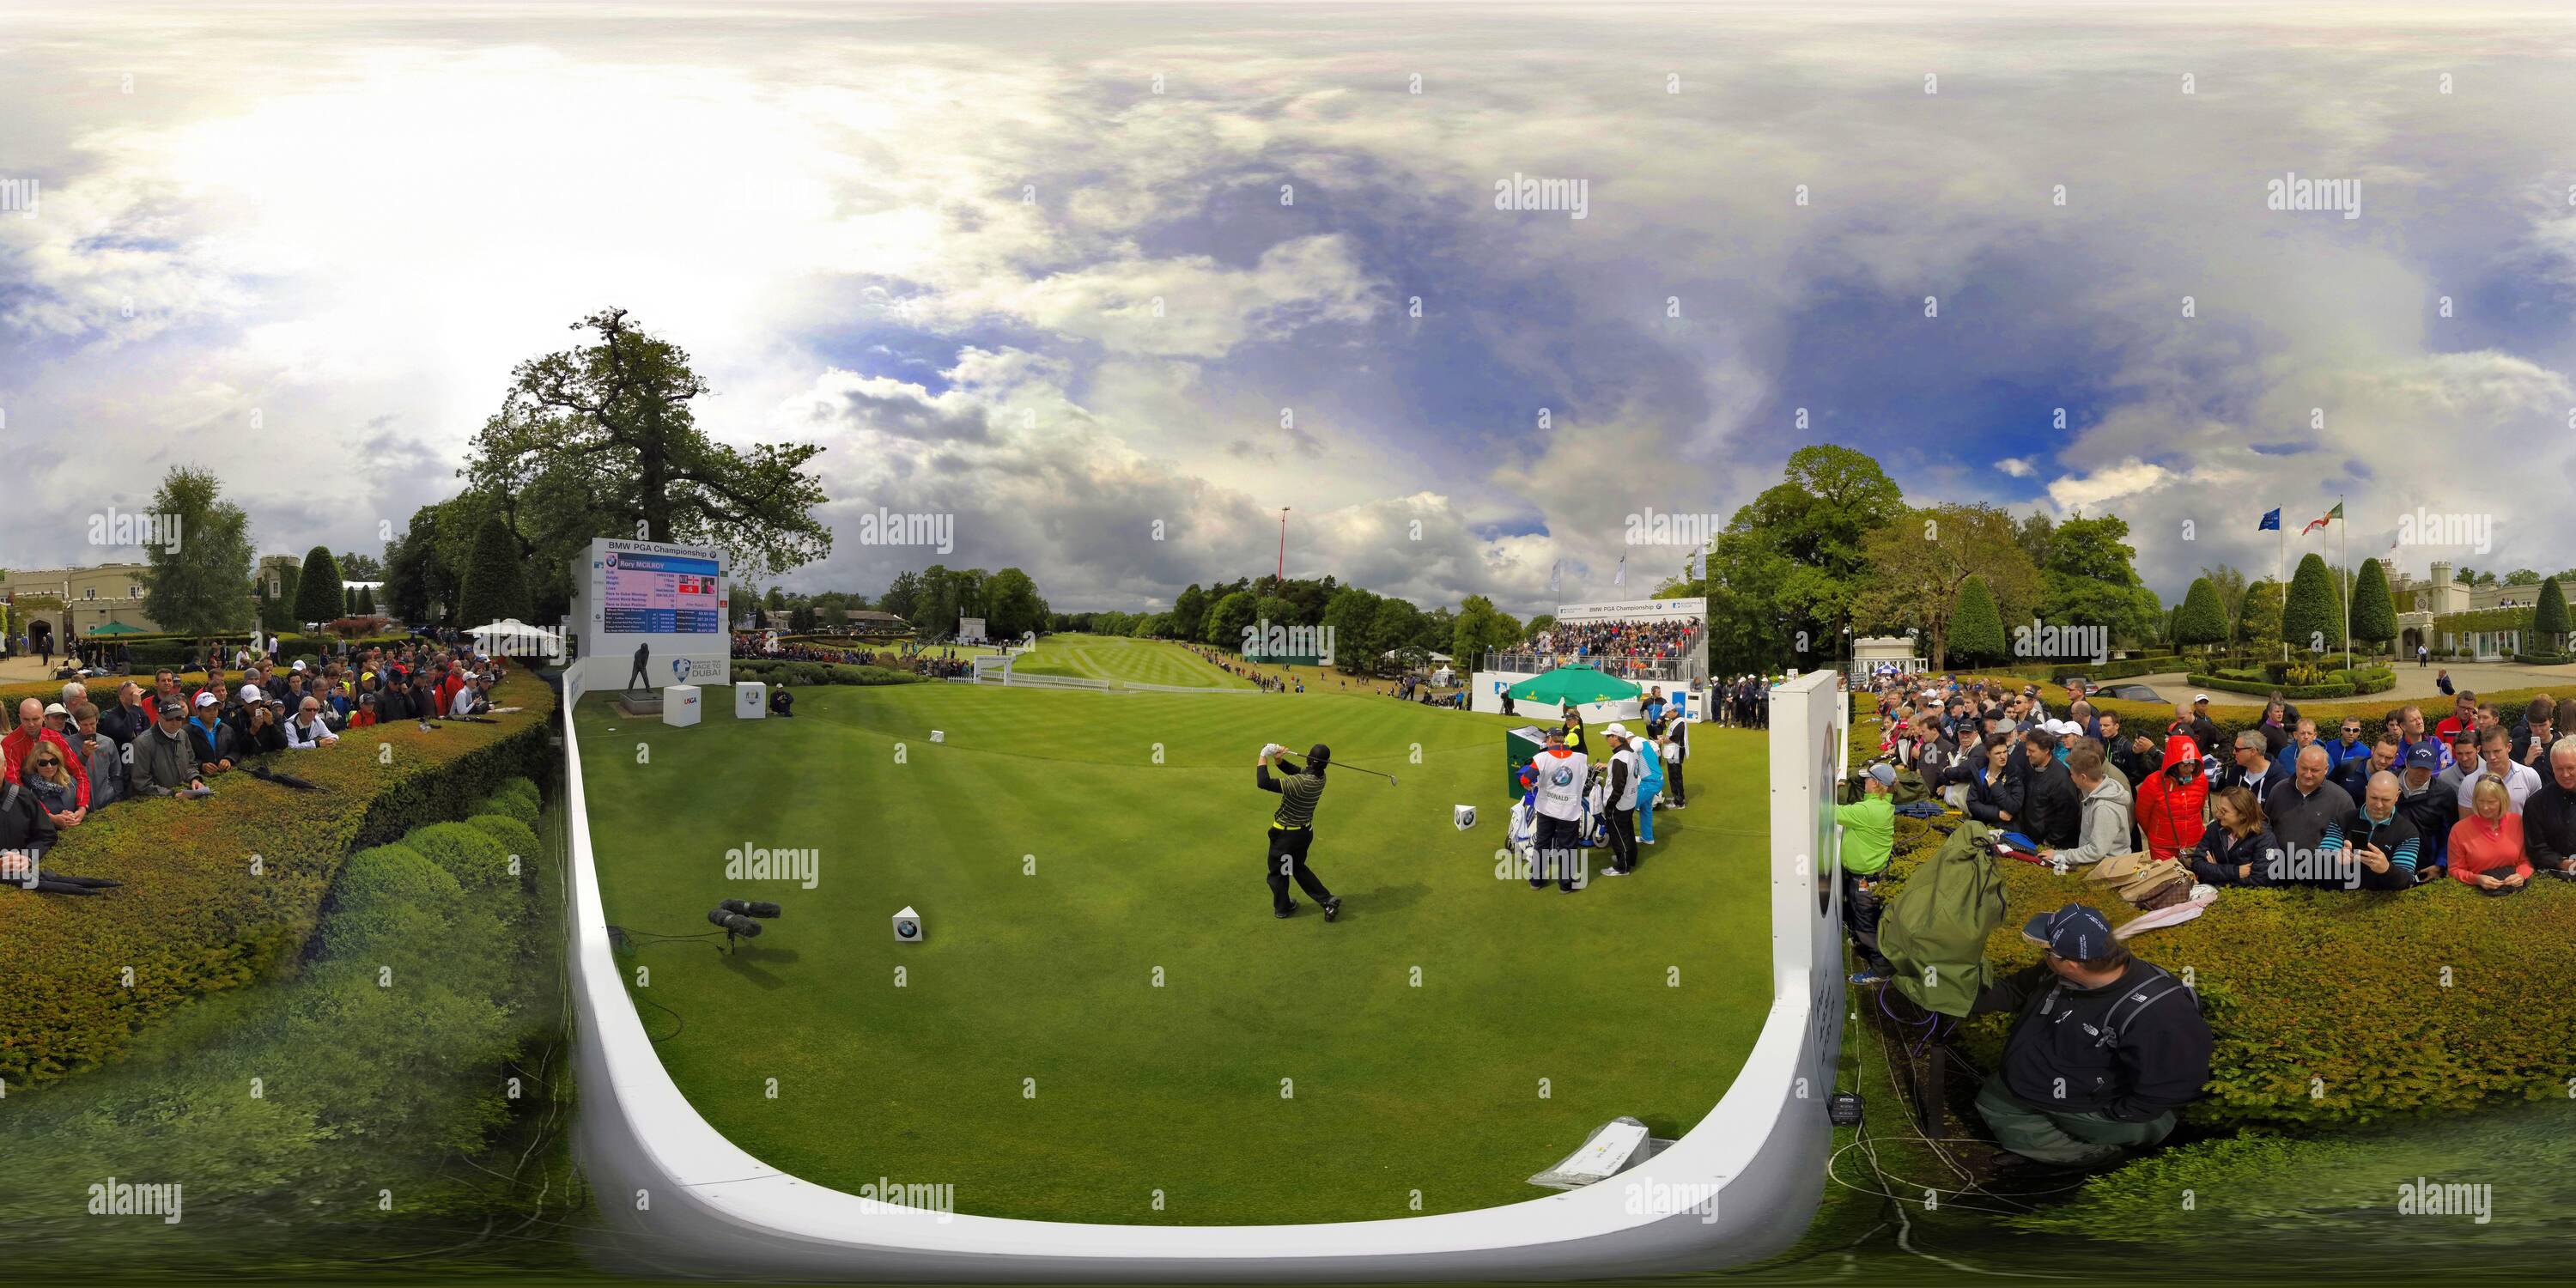 360 degree panoramic view of RORY MCILROY DRIVES OFF THE FIRST TEE AT THE BMW PGA CHAMPIONSHIP AT WENTWORTH SURREY. PIC : MARK PAIN / ALAMY